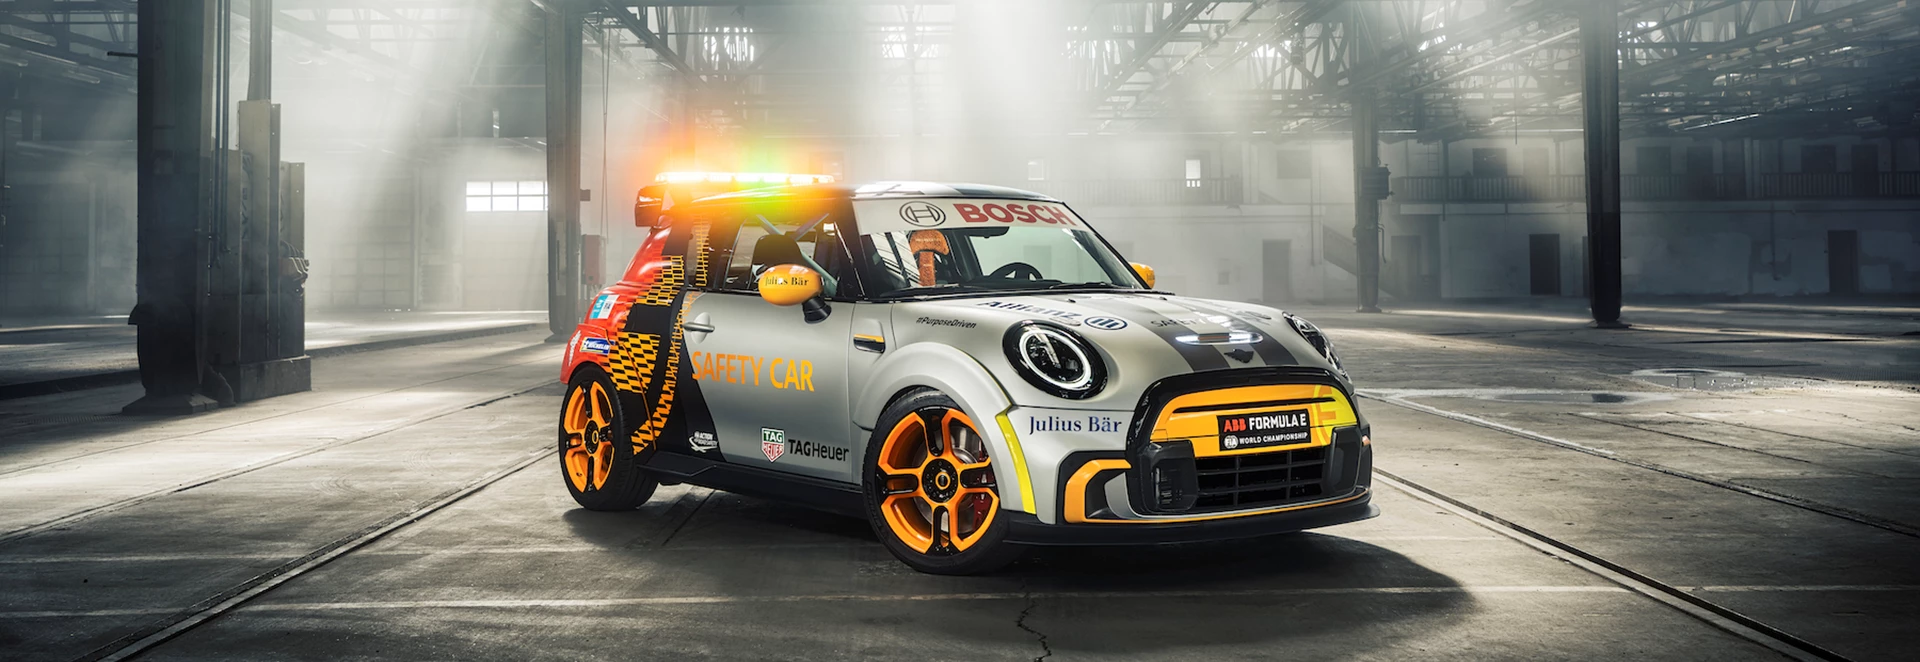 Mini reveals striking Pacesetter as Formula E’s newest safety car 